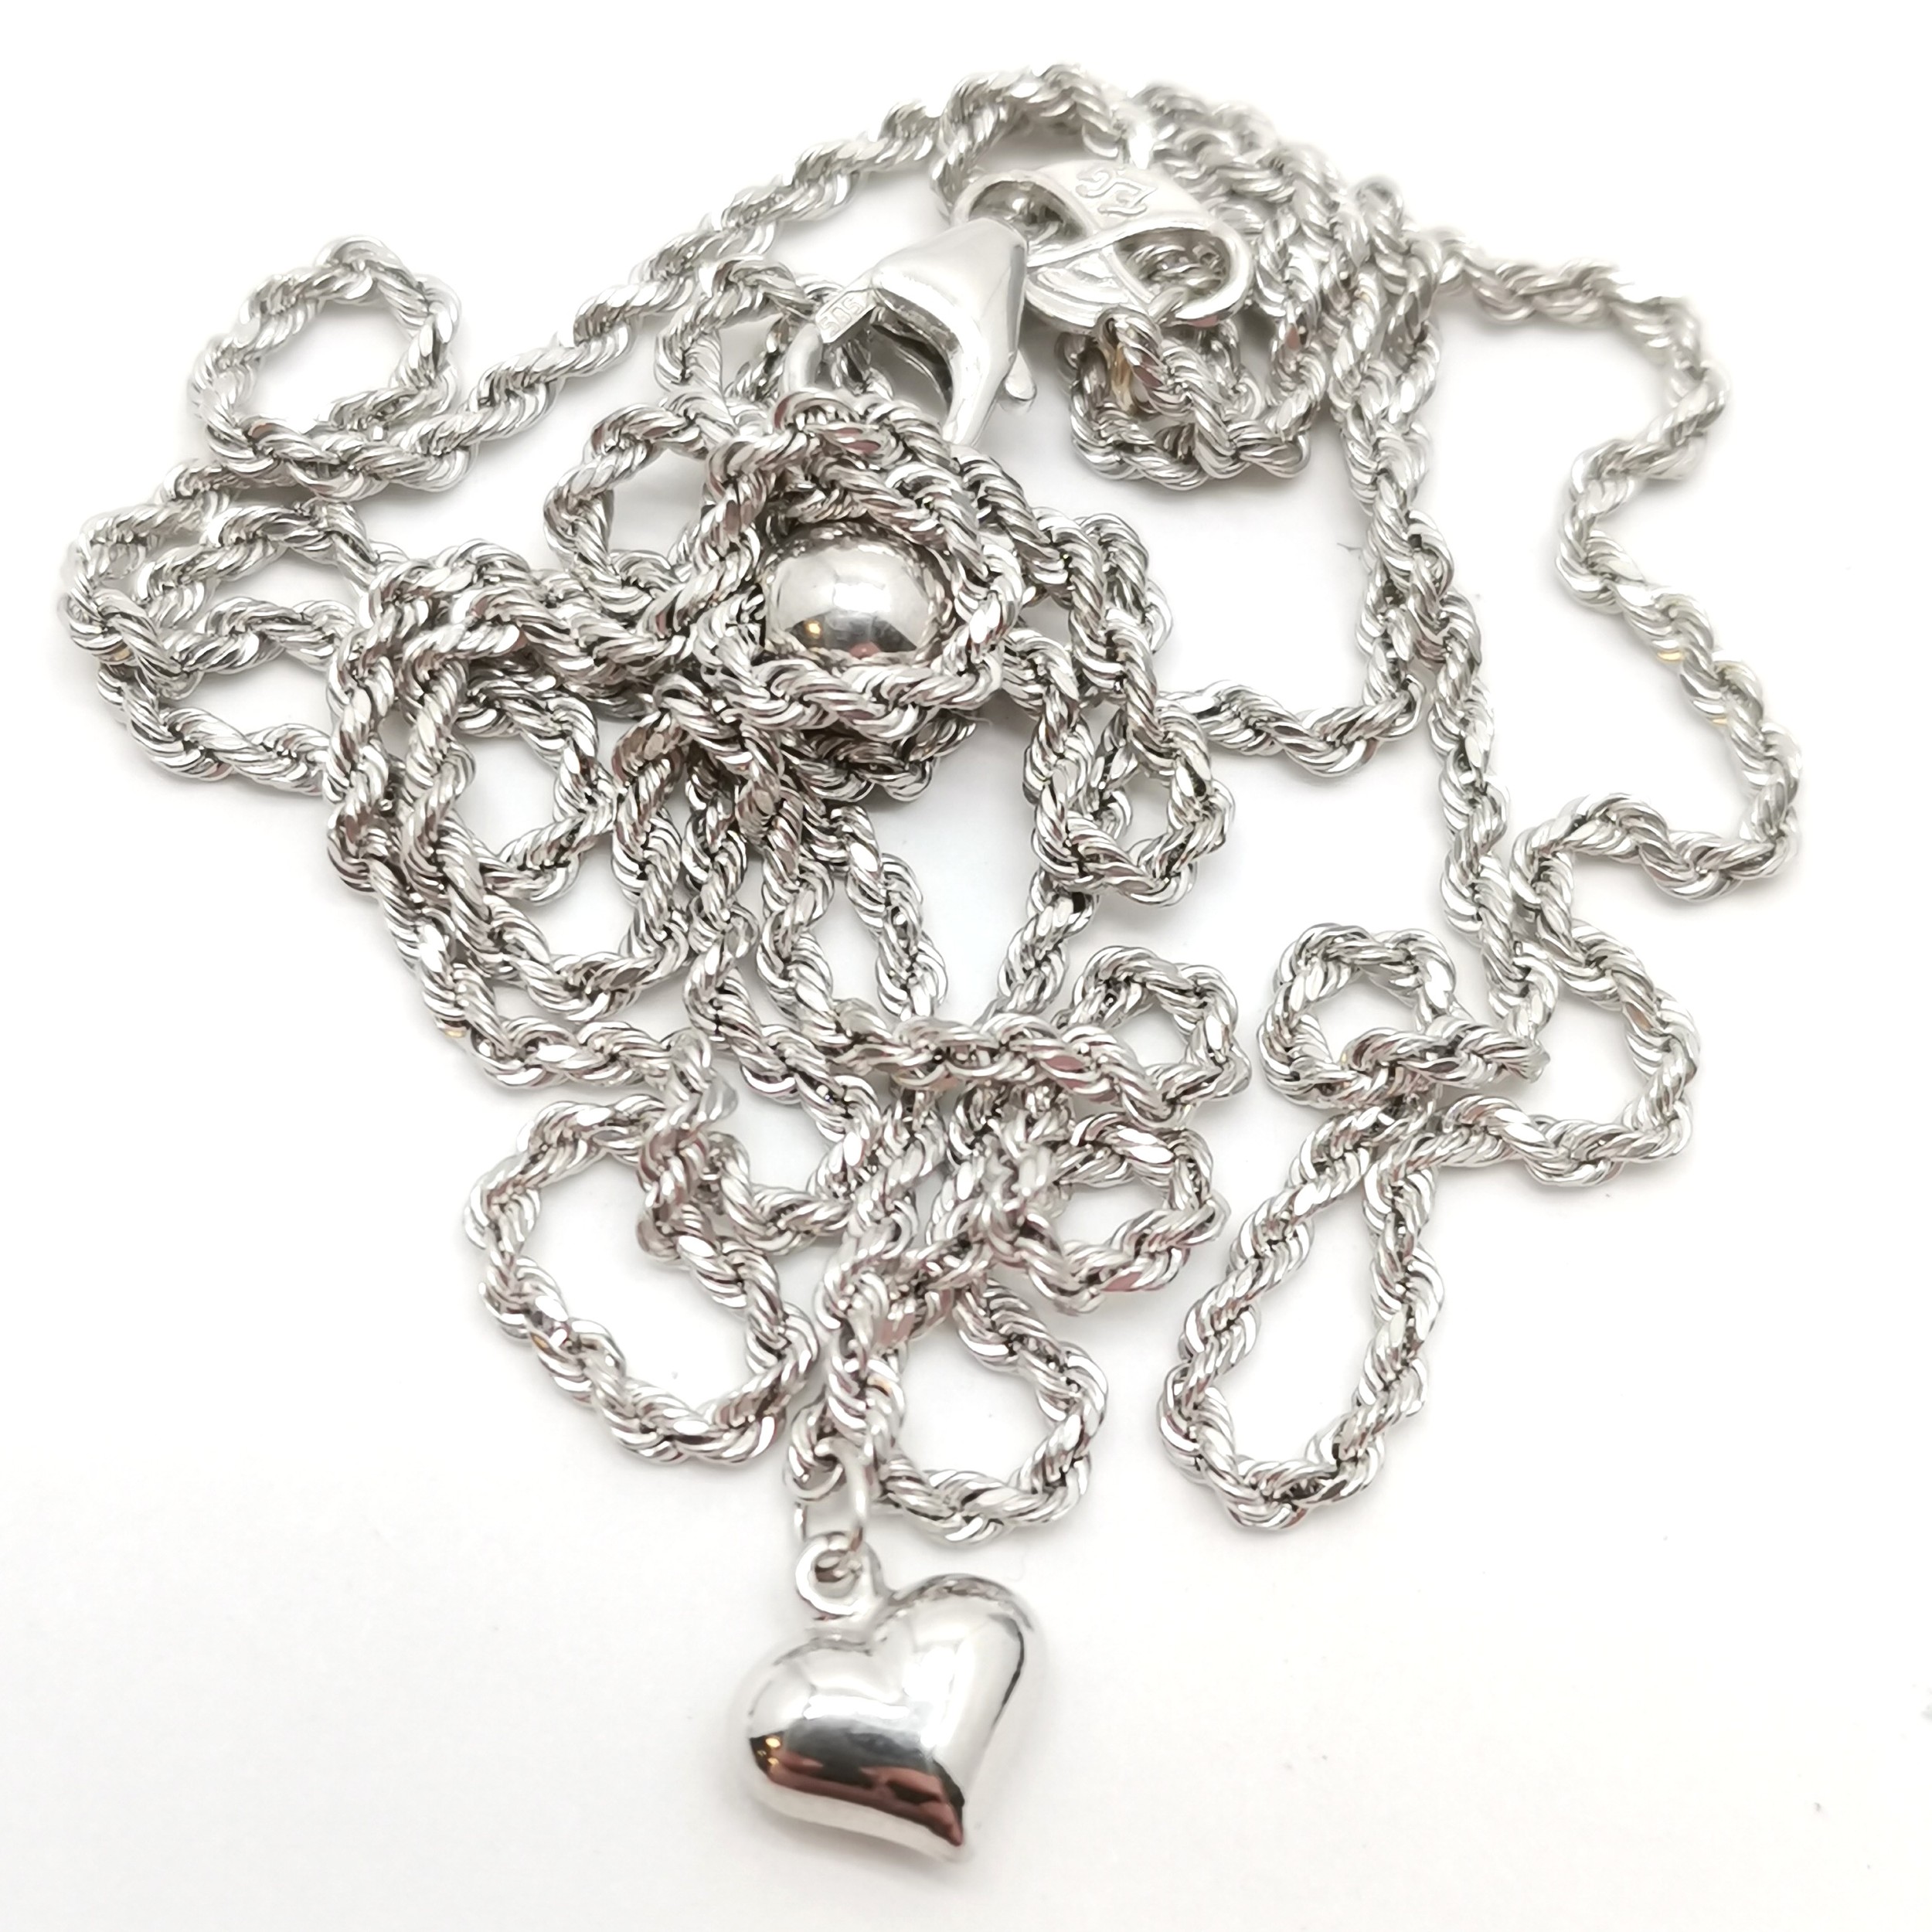 Bolivia 14ct white gold chain with heart pendant detail - 48cm + 11cm drop & 3.2g - Image 2 of 4